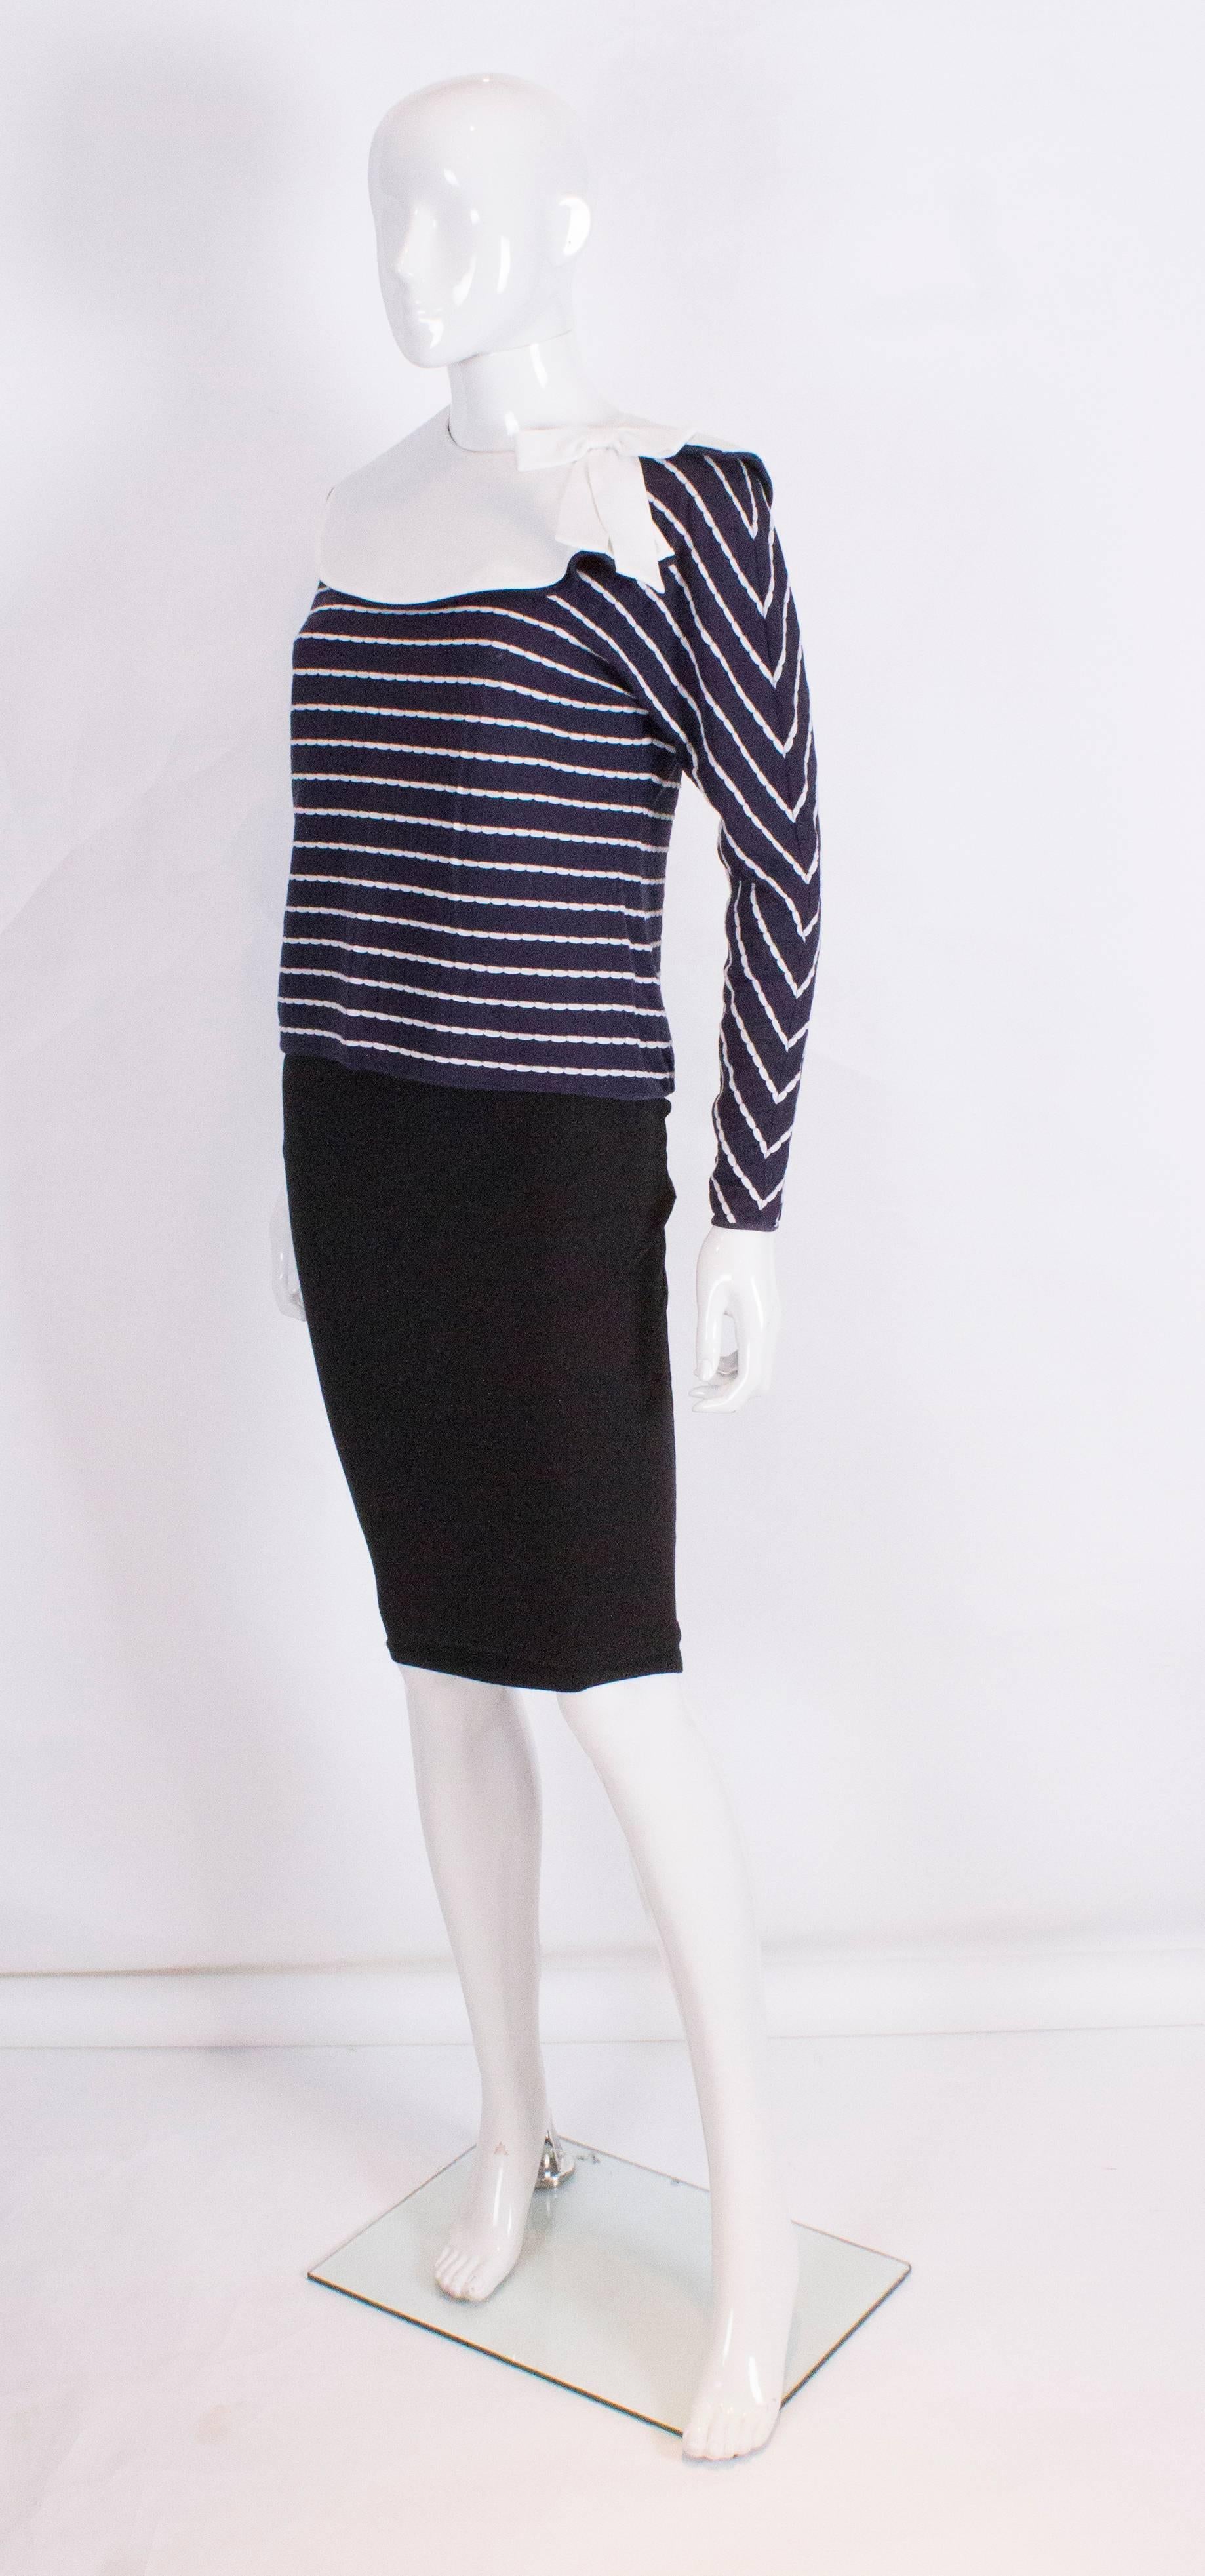 A chic blue and white top  by Valentino with detachable white collar.The top is blue with white horizontal stripe and has a detachable  blue and white detachable collar with a bow.